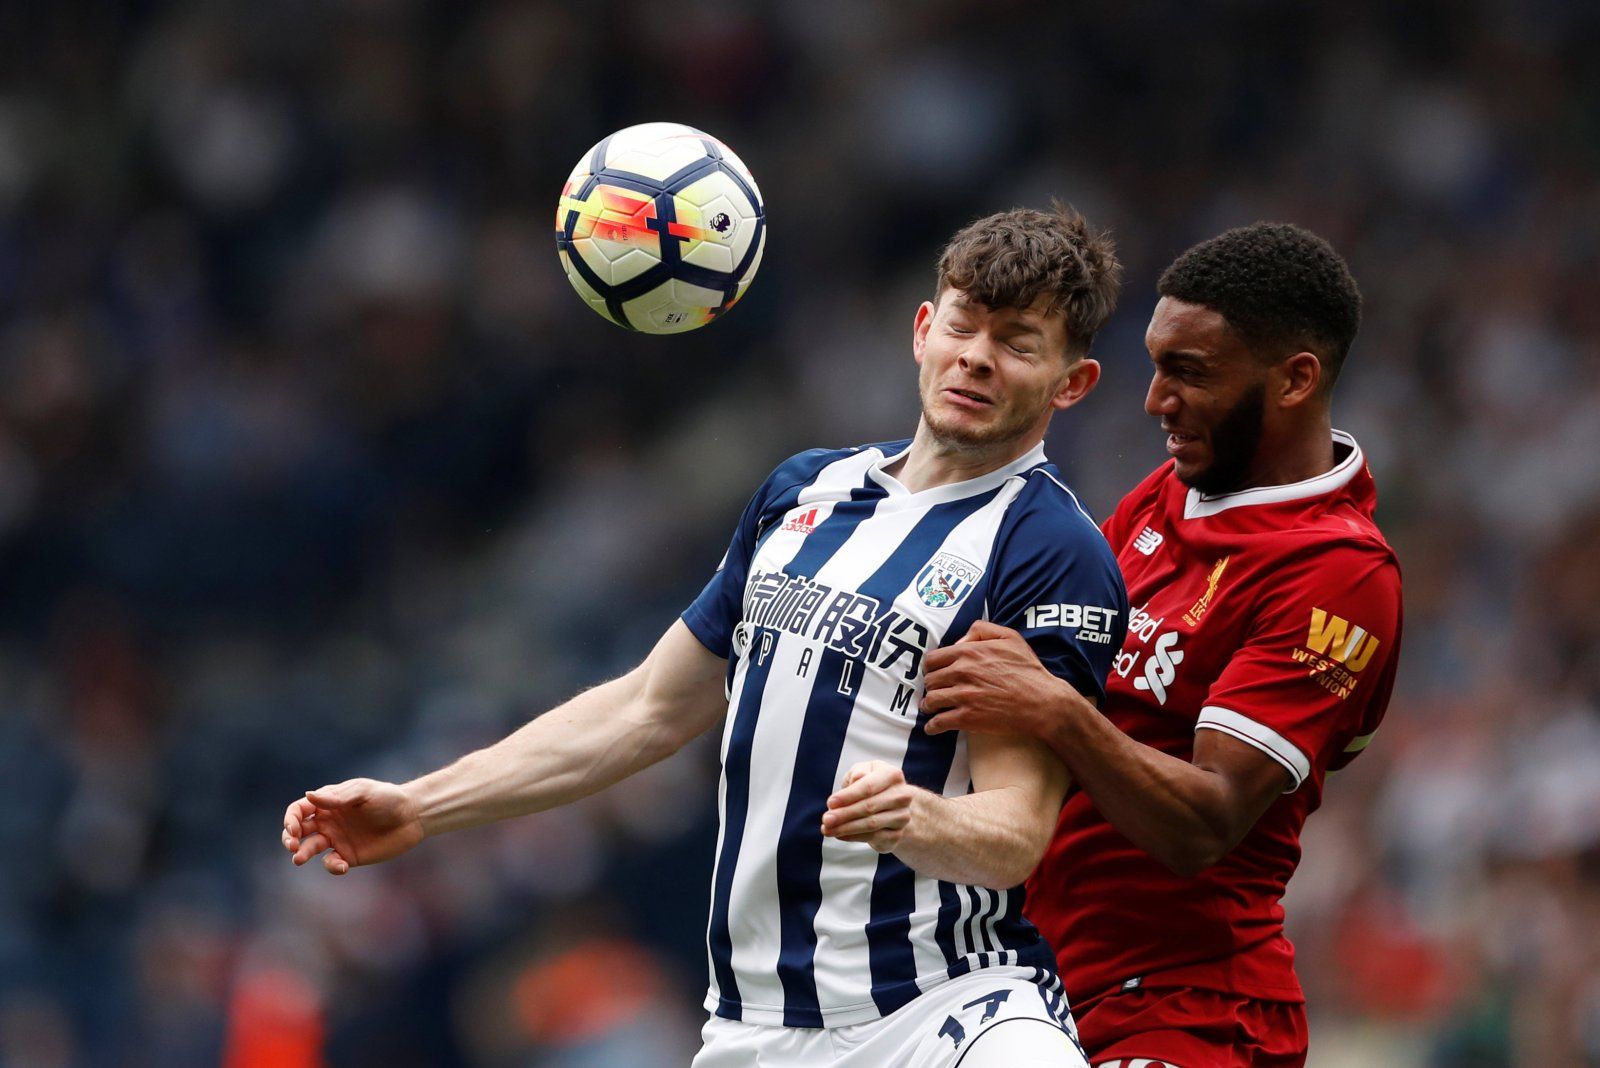 ‘He’s bang on’ – Former Celtic star issues verdict on West Brom loanee Oliver Burke: Opinion